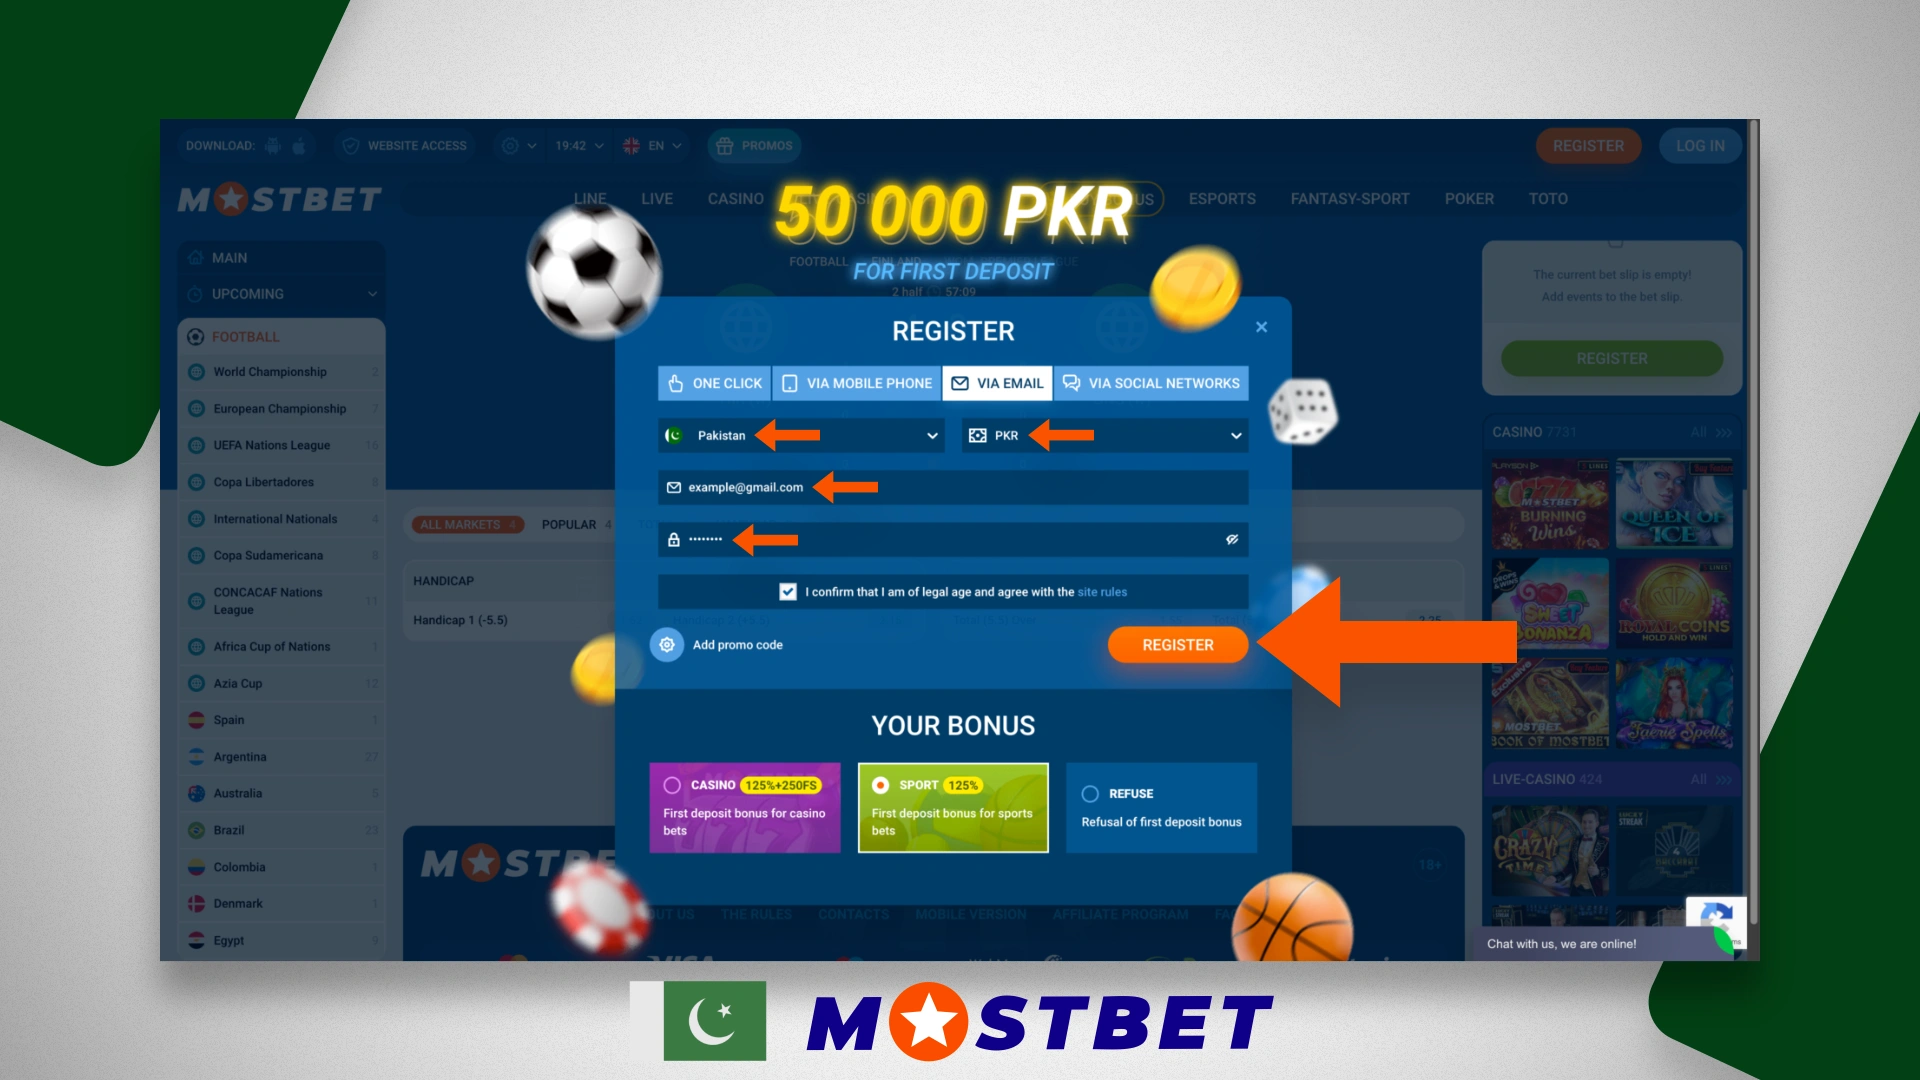 New customer registration form from Pakistan on Mostbet website